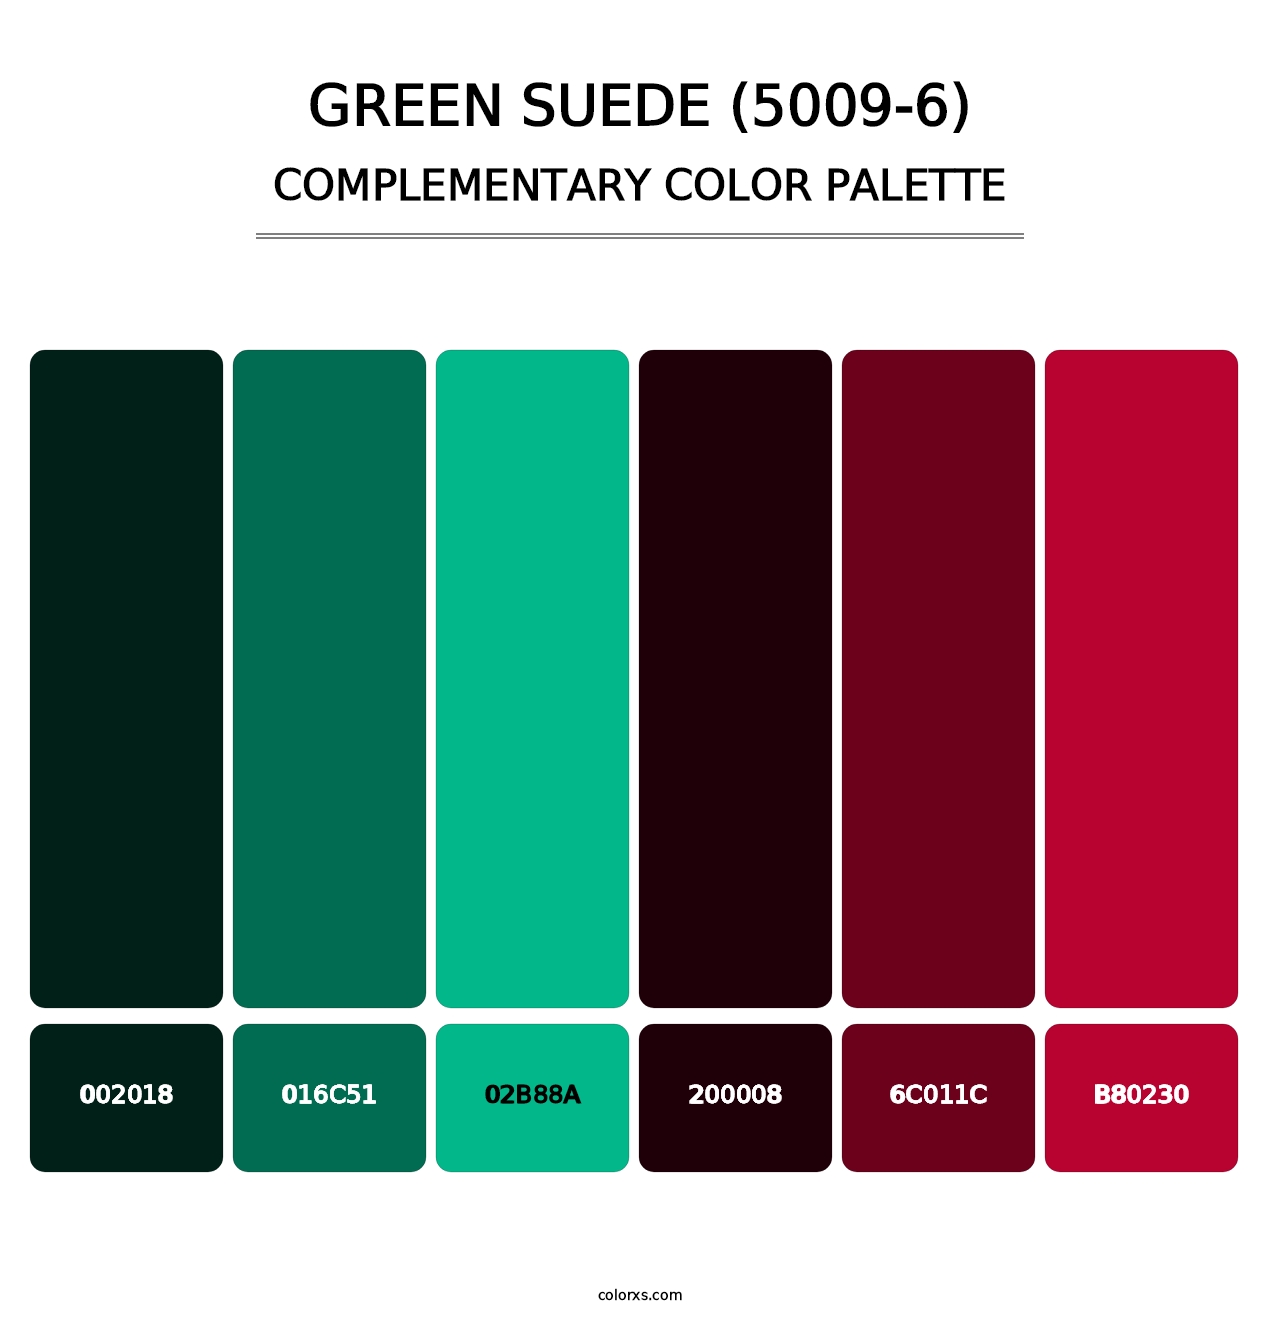 Green Suede (5009-6) - Complementary Color Palette